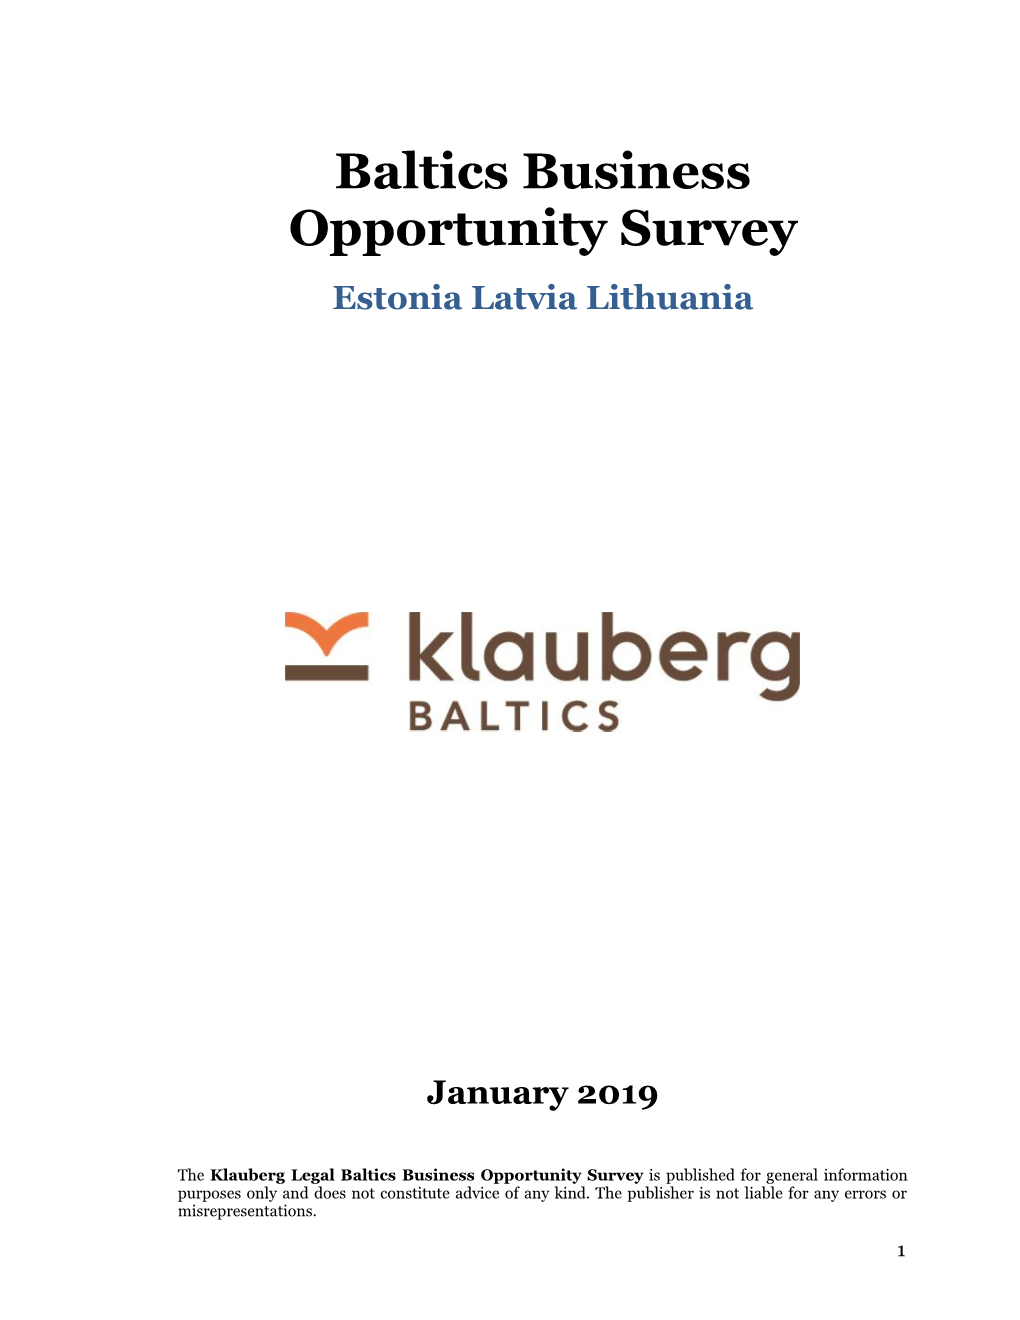 Baltics Business Opportunity Survey Is Published for General Information Purposes Only and Does Not Constitute Advice of Any Kind